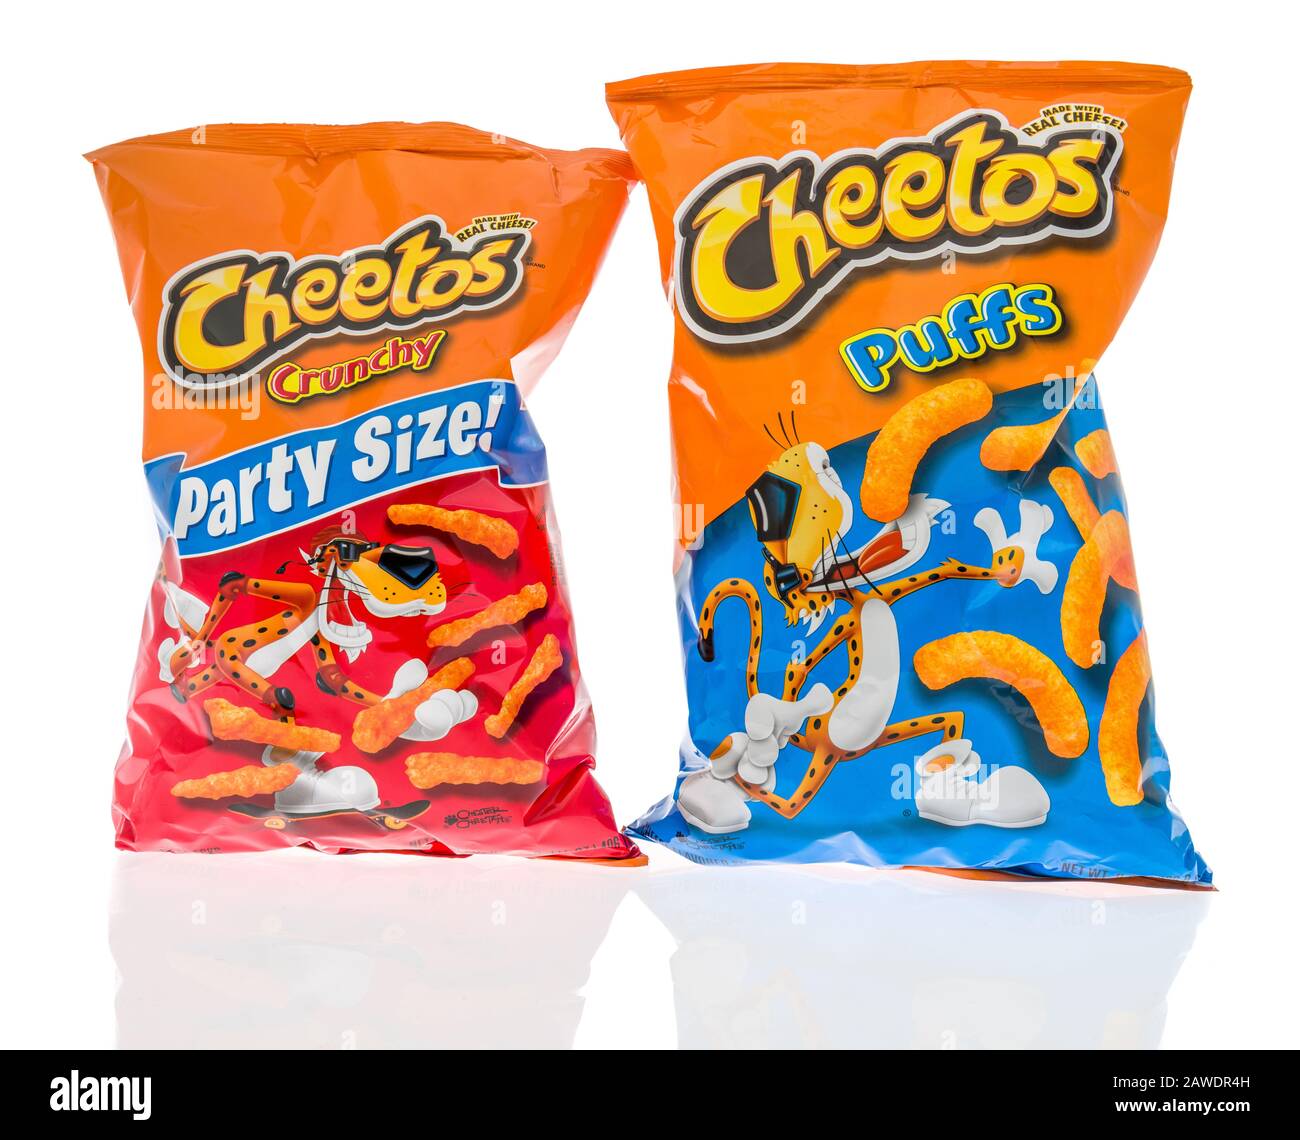 Winneconne,  WI - 7 February 2020:  A package of Cheetos crunchy and puffs  cheddar on an isolated background. Stock Photo